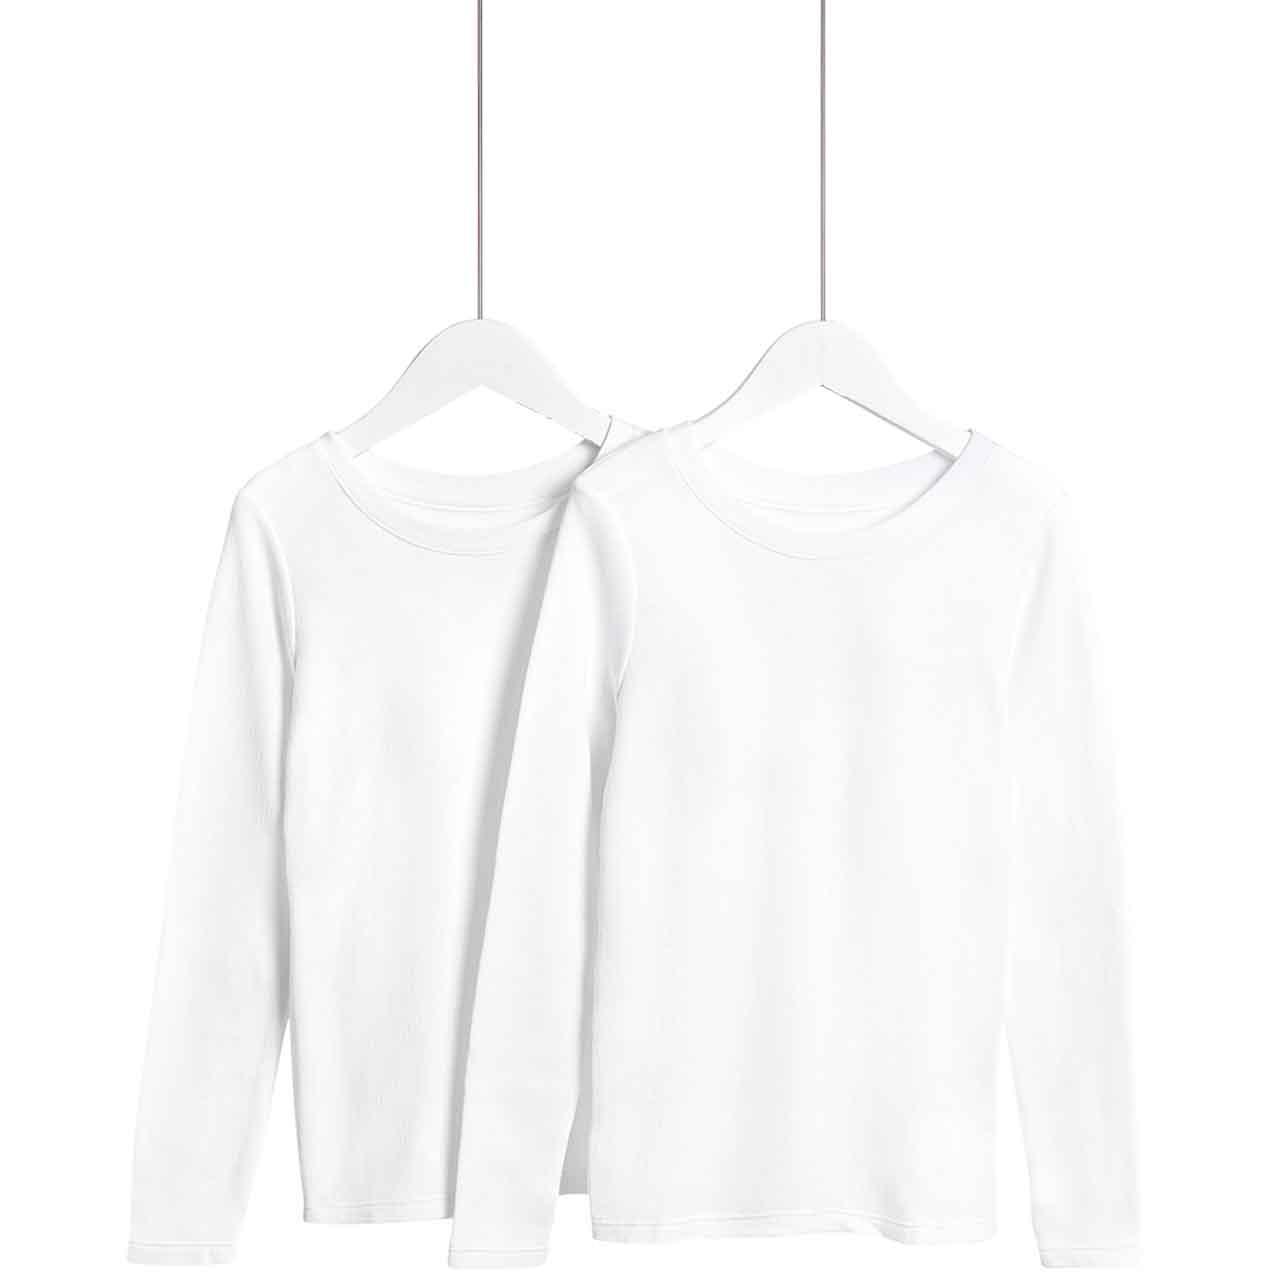 M&S Thermal Top, 9-10 Years, White, 2 Pack 